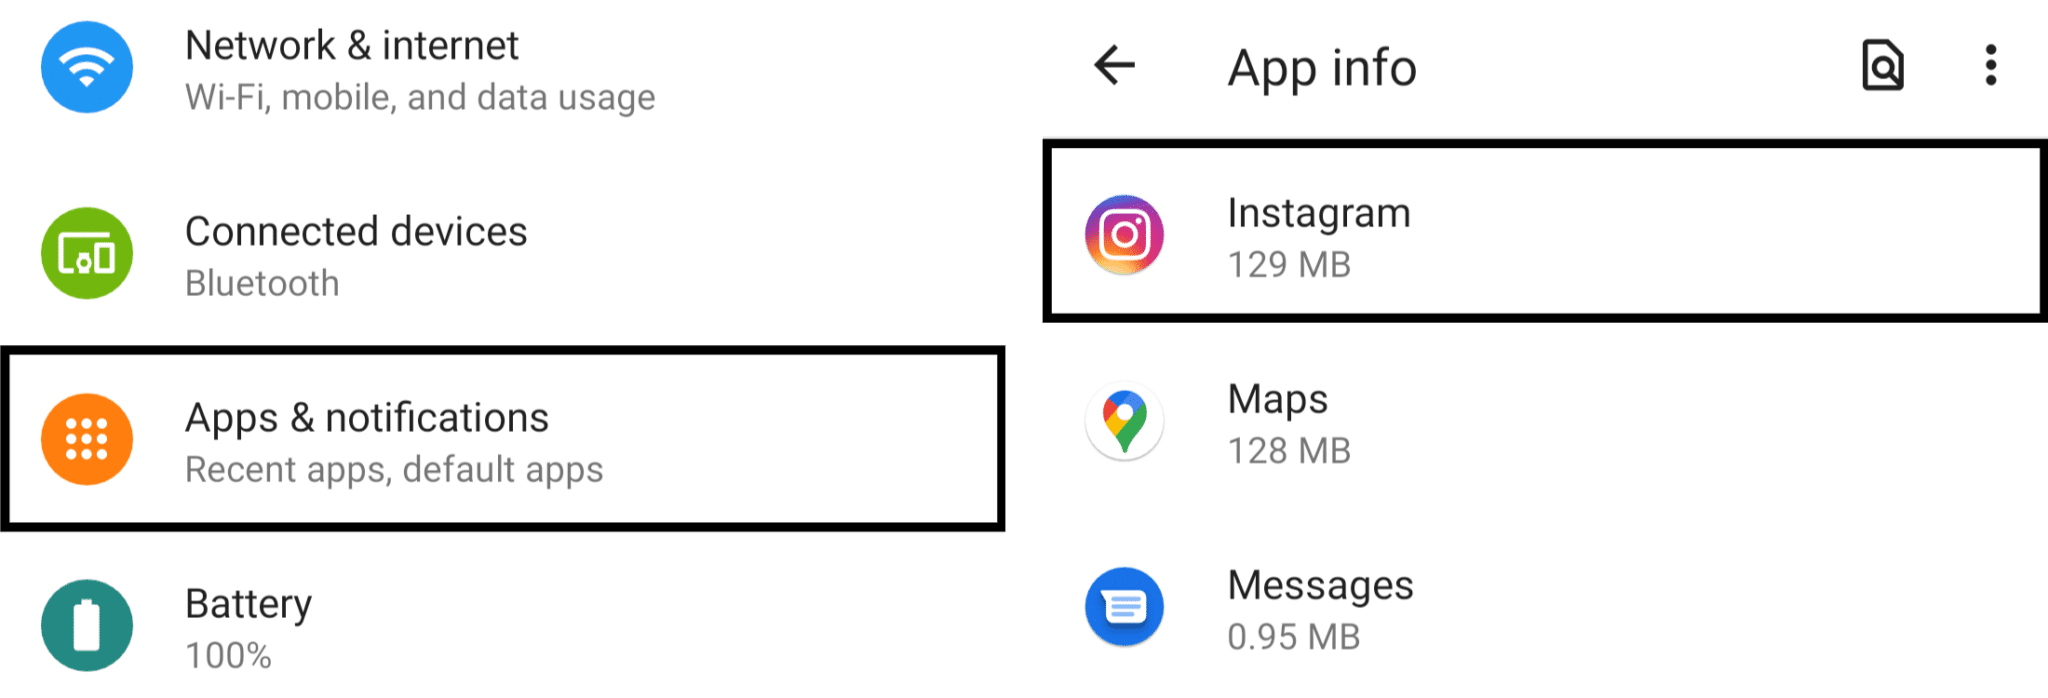 clear instagram cache android to fix instagram not posting to facebook